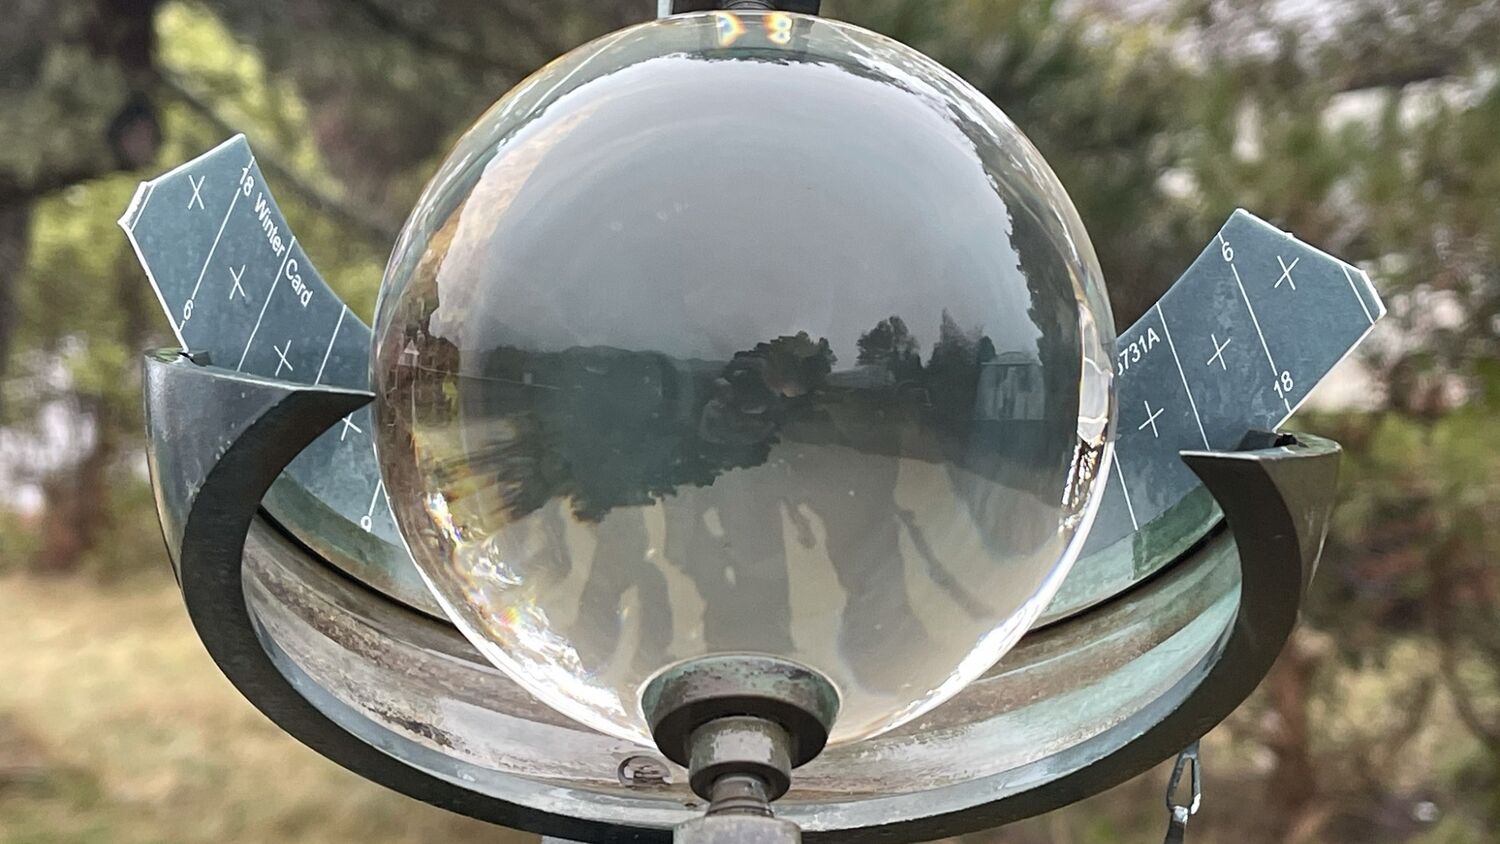 A close-up view of a sunlight recorder, which consists of a glass ball (rather like a crystal ball) mounted on a sundial-type frame. A metal structure half encircles it, with markings on it to chart the sun's progress.